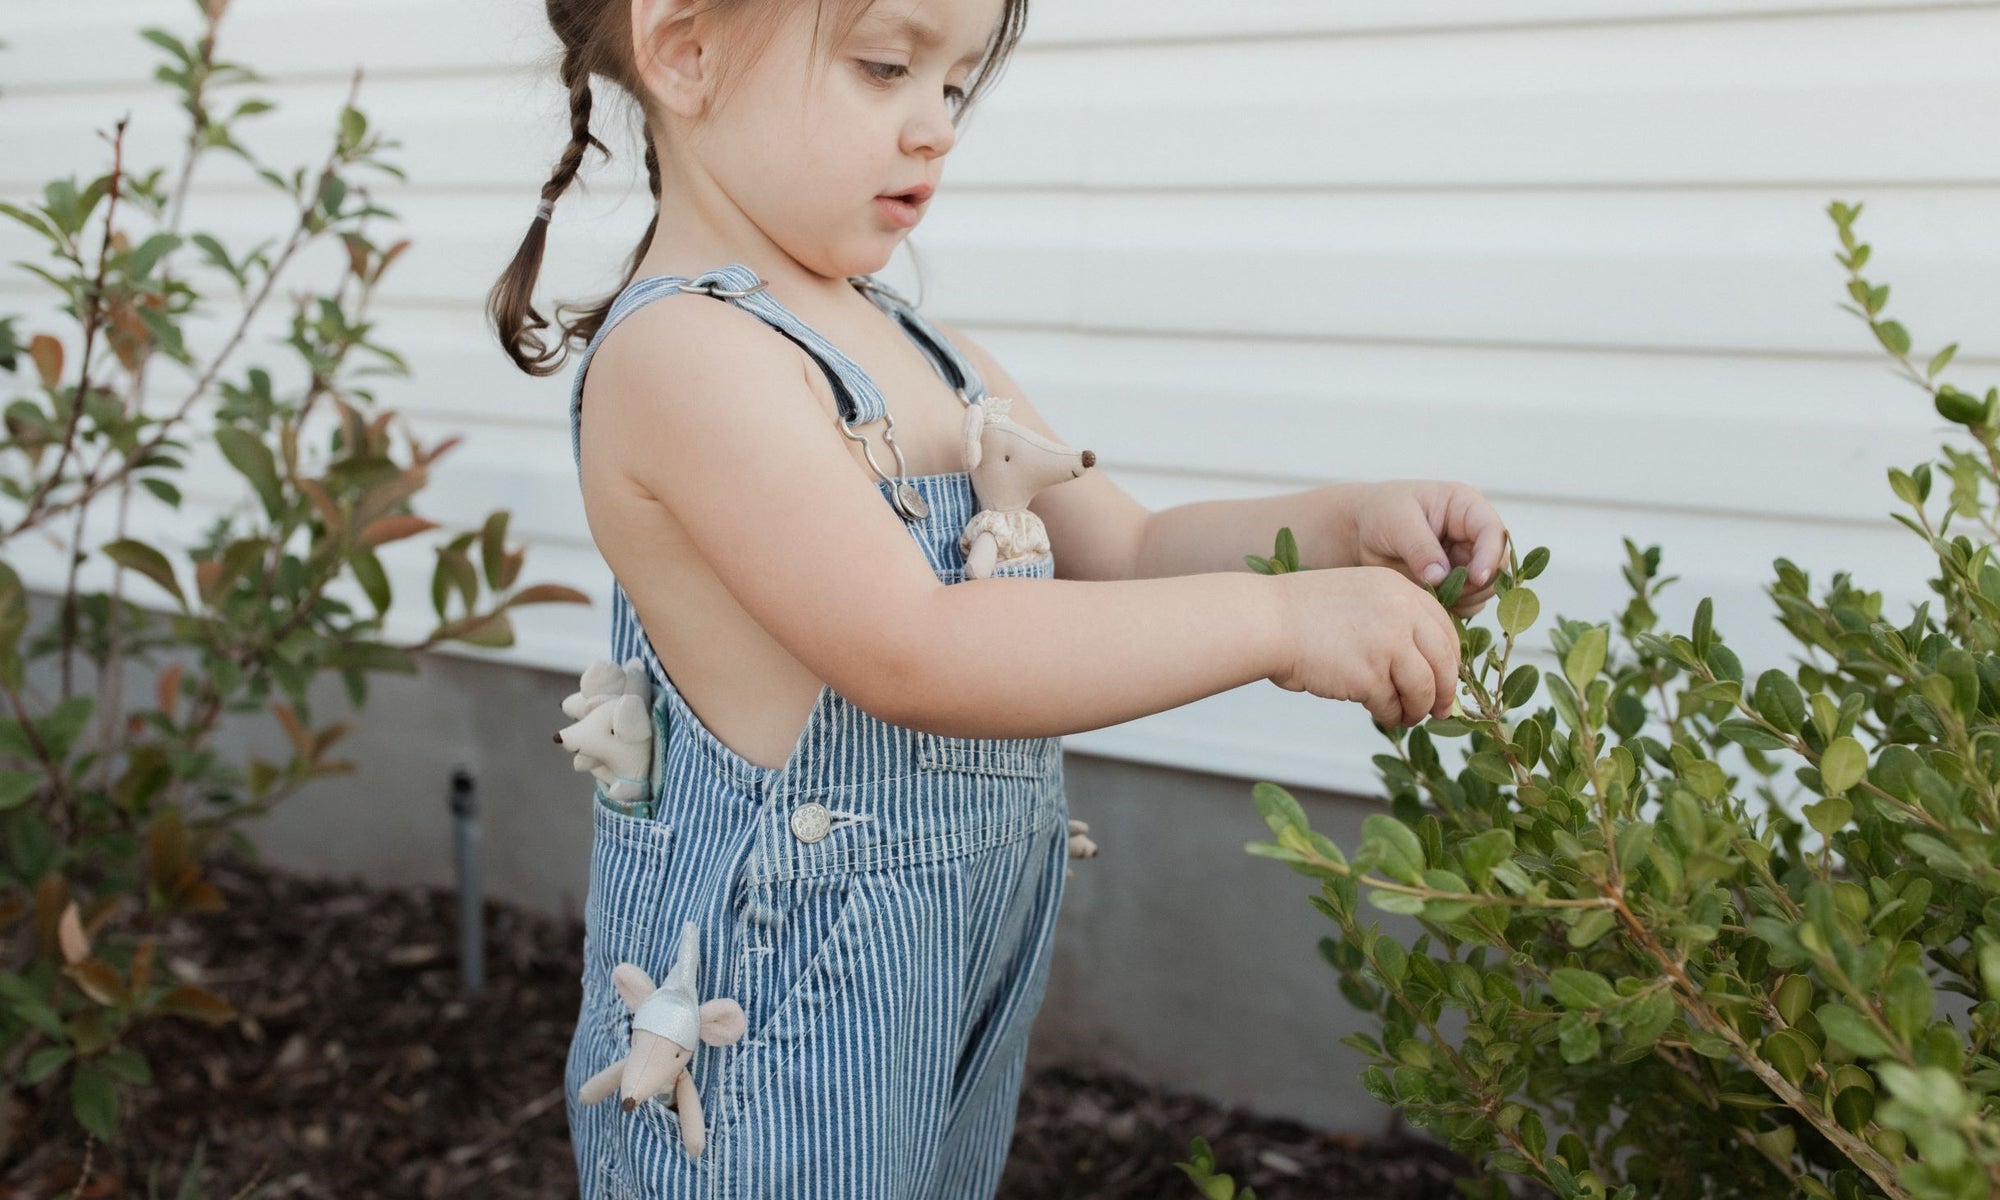 A child outside wearing overalls with Maileg mice in her pockets.